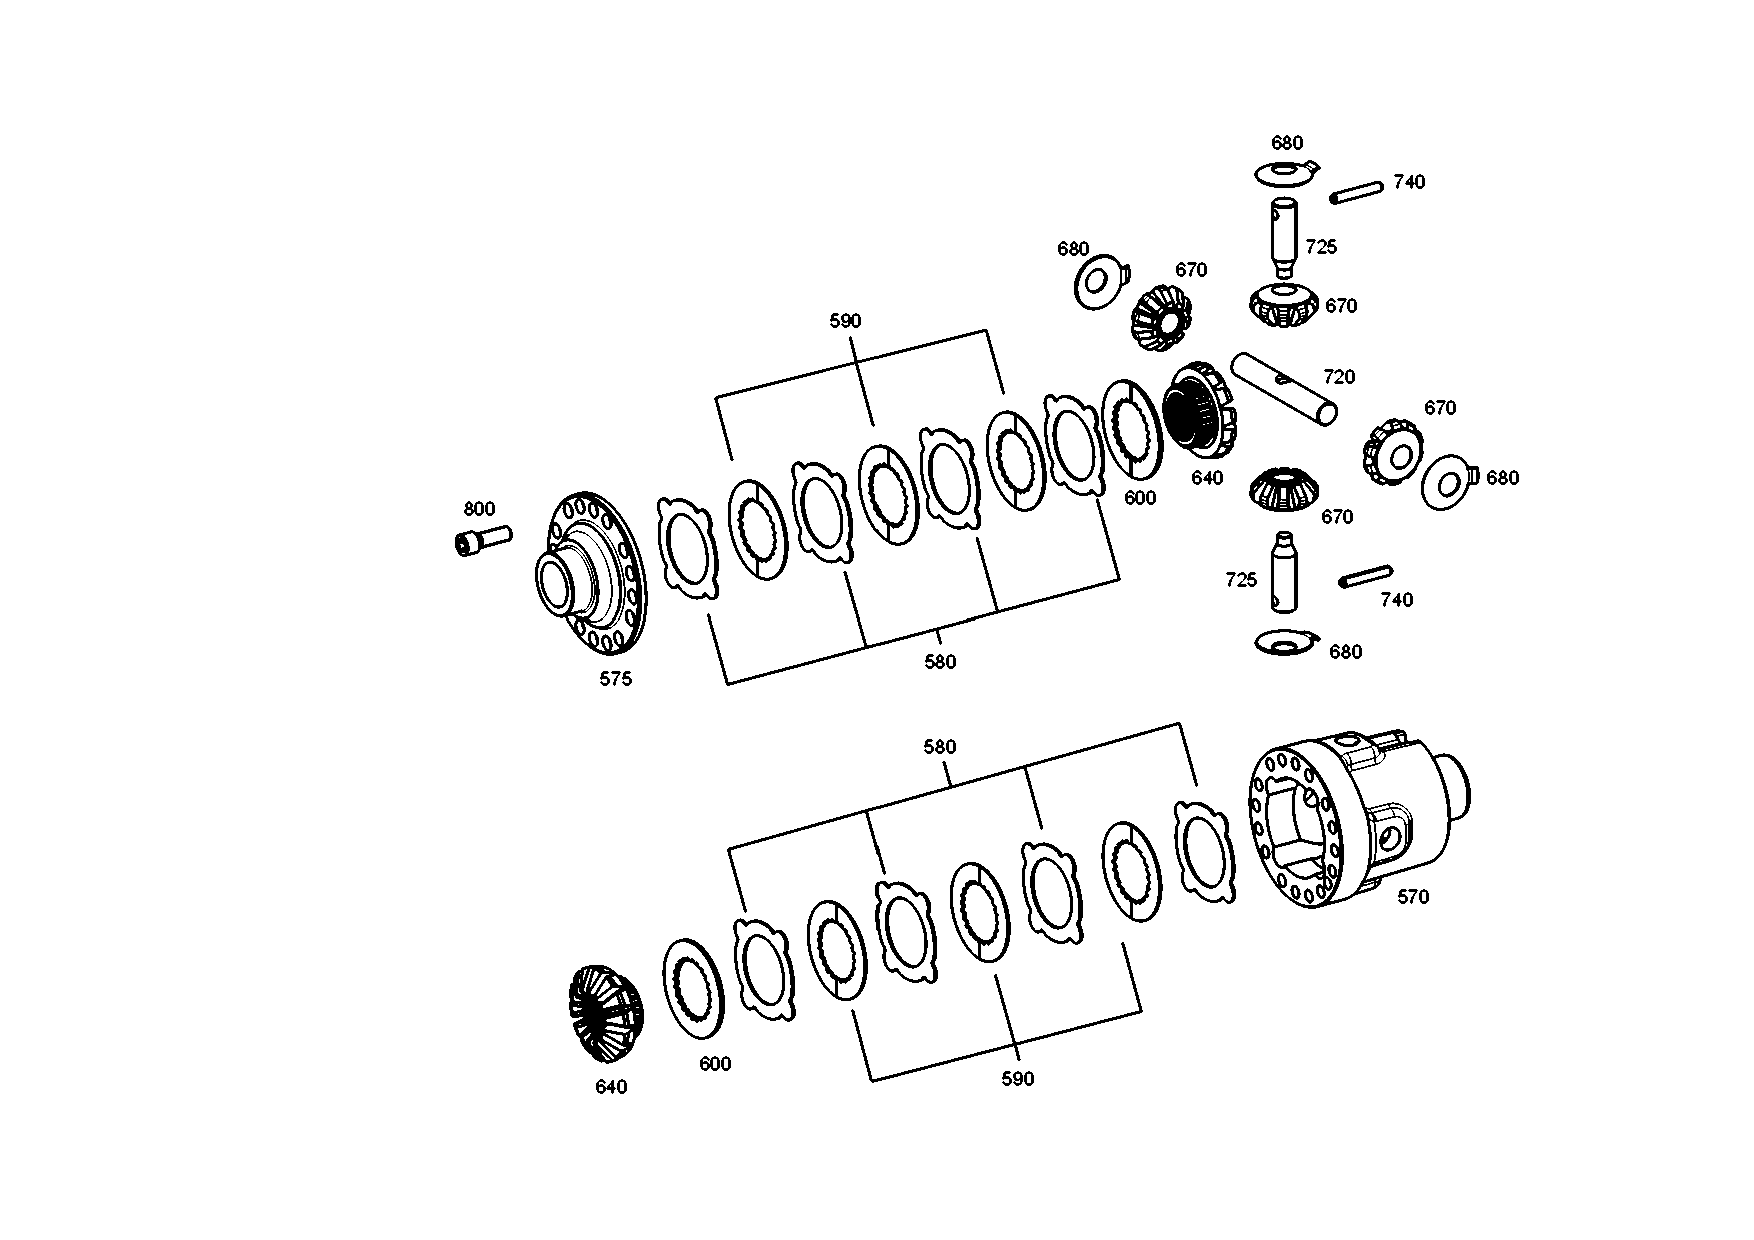 drawing for AGCO F743300021880 - SLOT.PIN (figure 5)